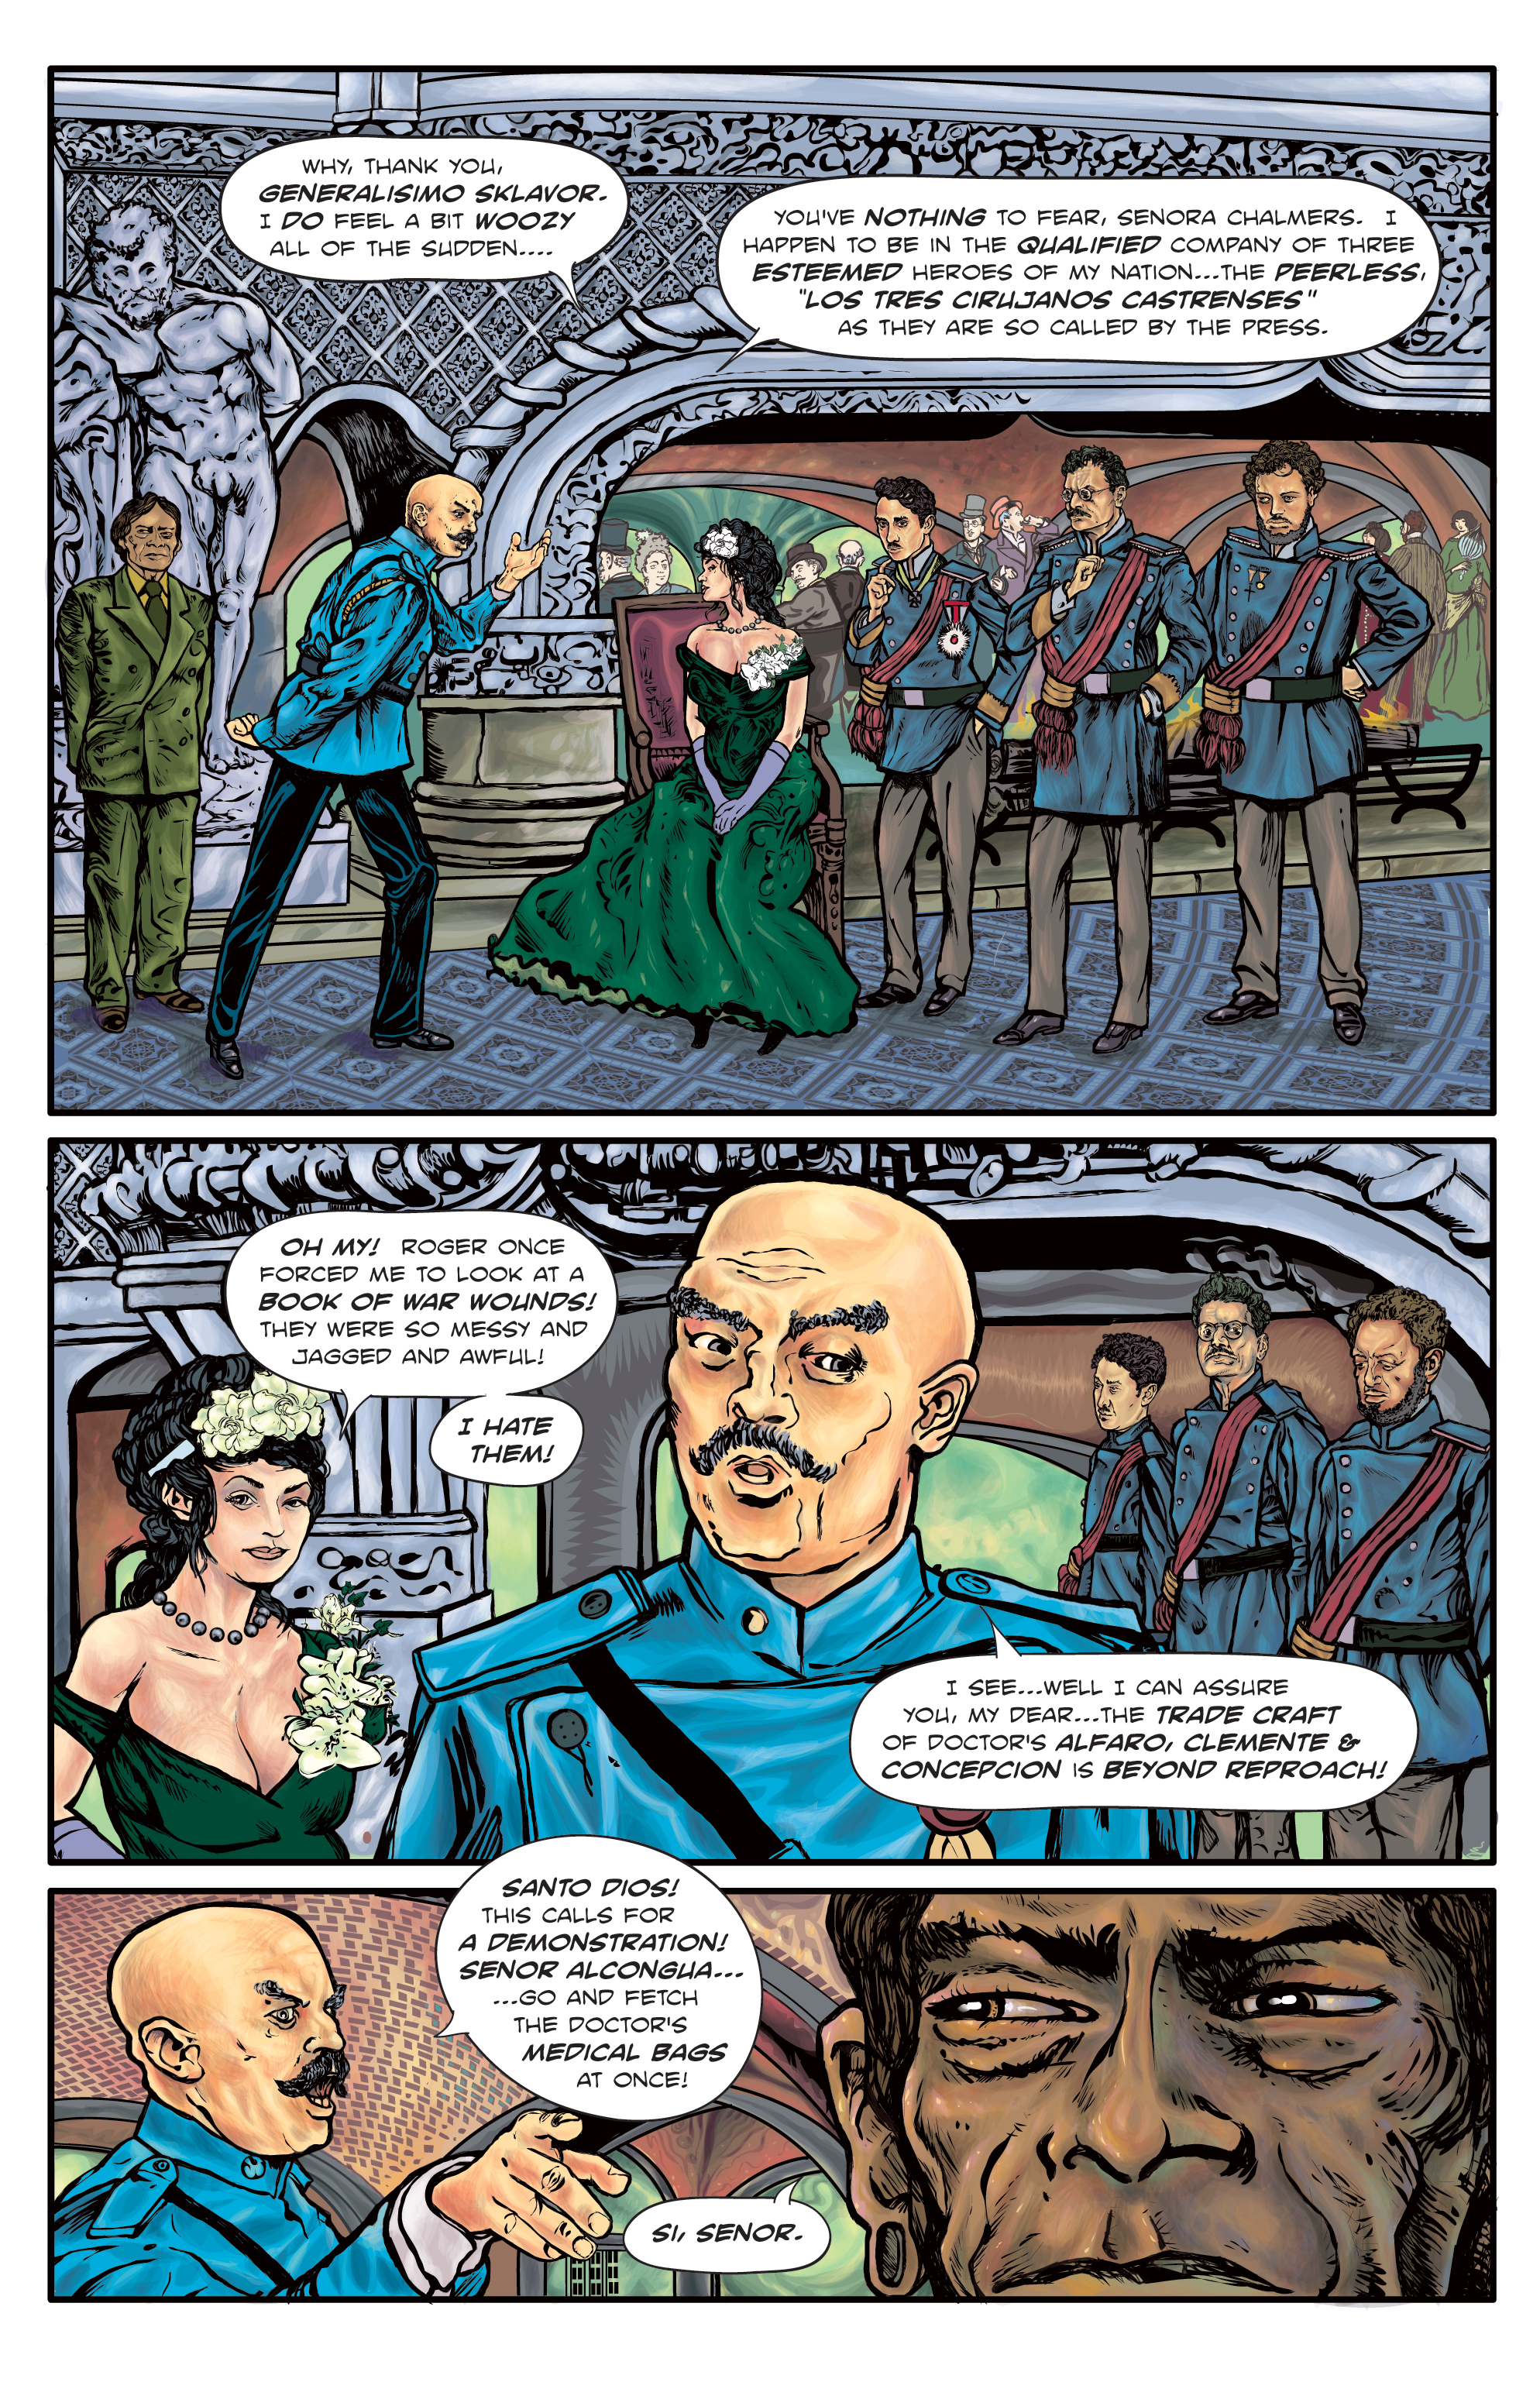 The Enchanted Dagger #4 -page 10